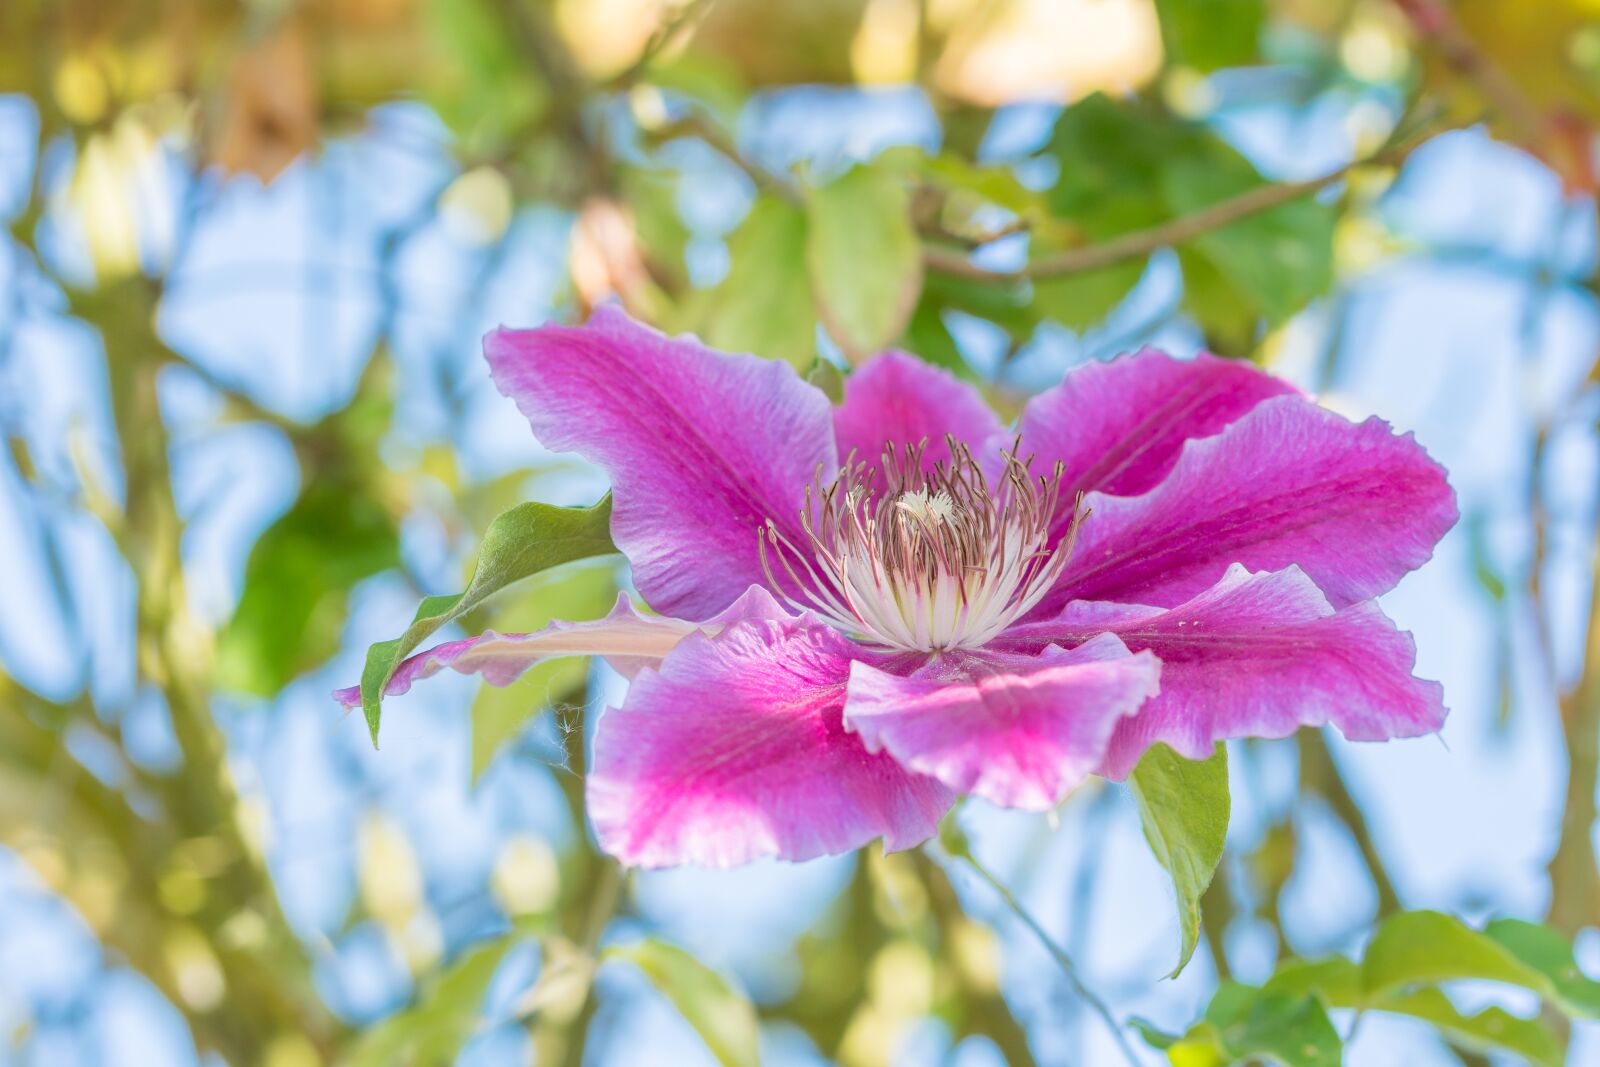 Sony a6500 sample photo. Clematis, blossom, bloom photography